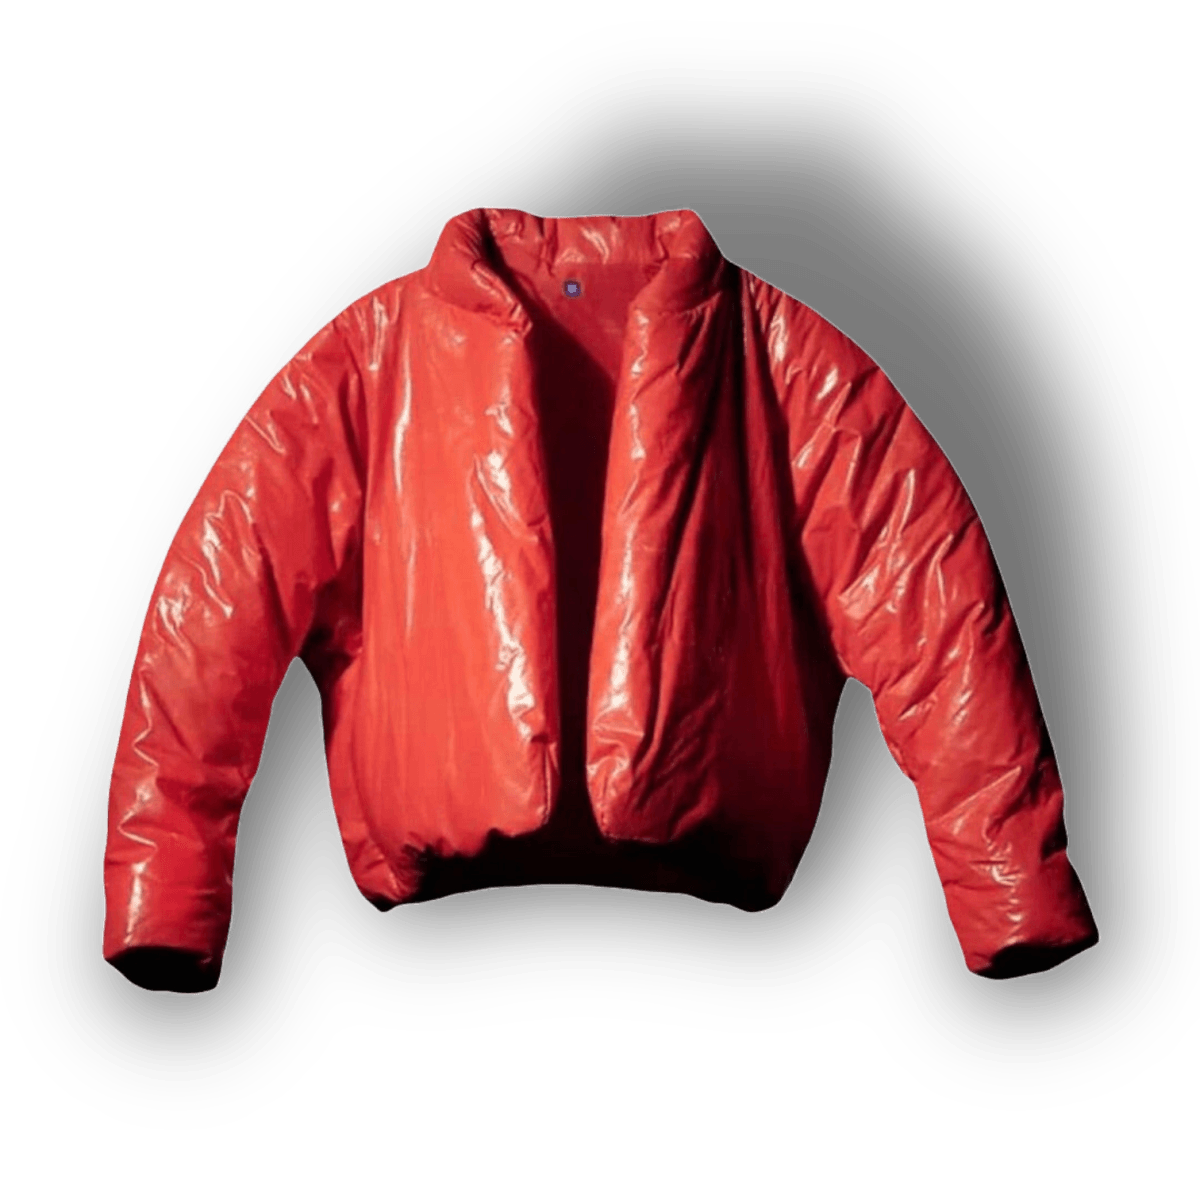 Yeezy x Gap Round Jacket Red - Outerwear - Yeezy - Jawns on Fire